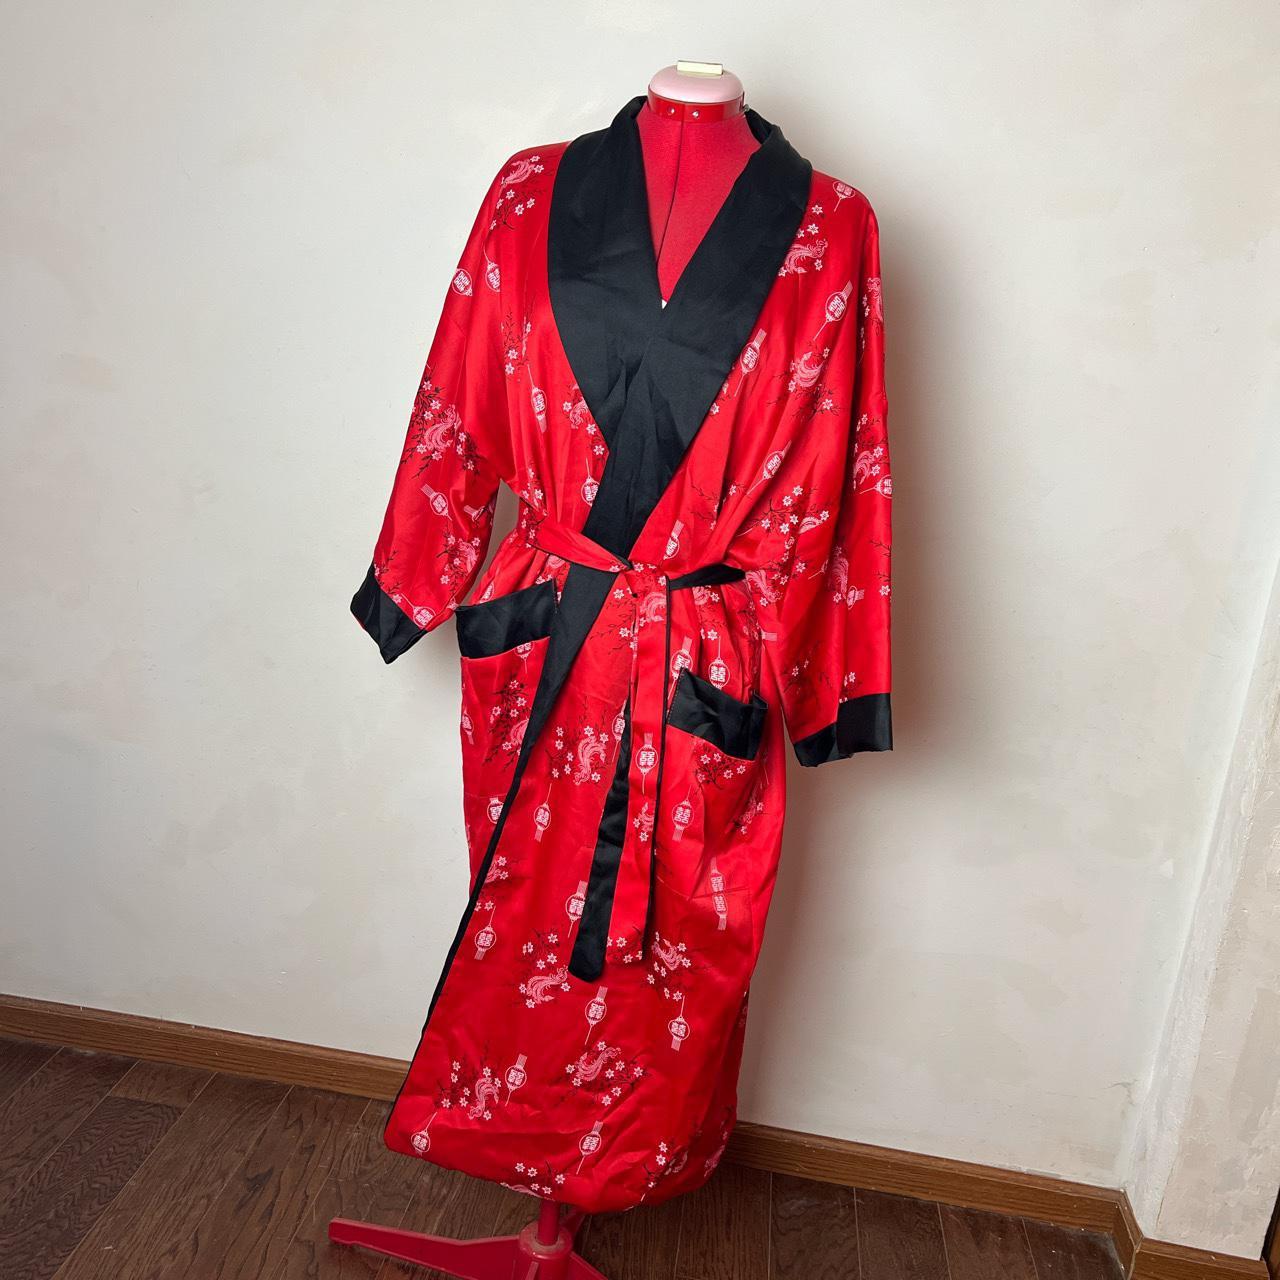 Women's Red and Black Robe | Depop